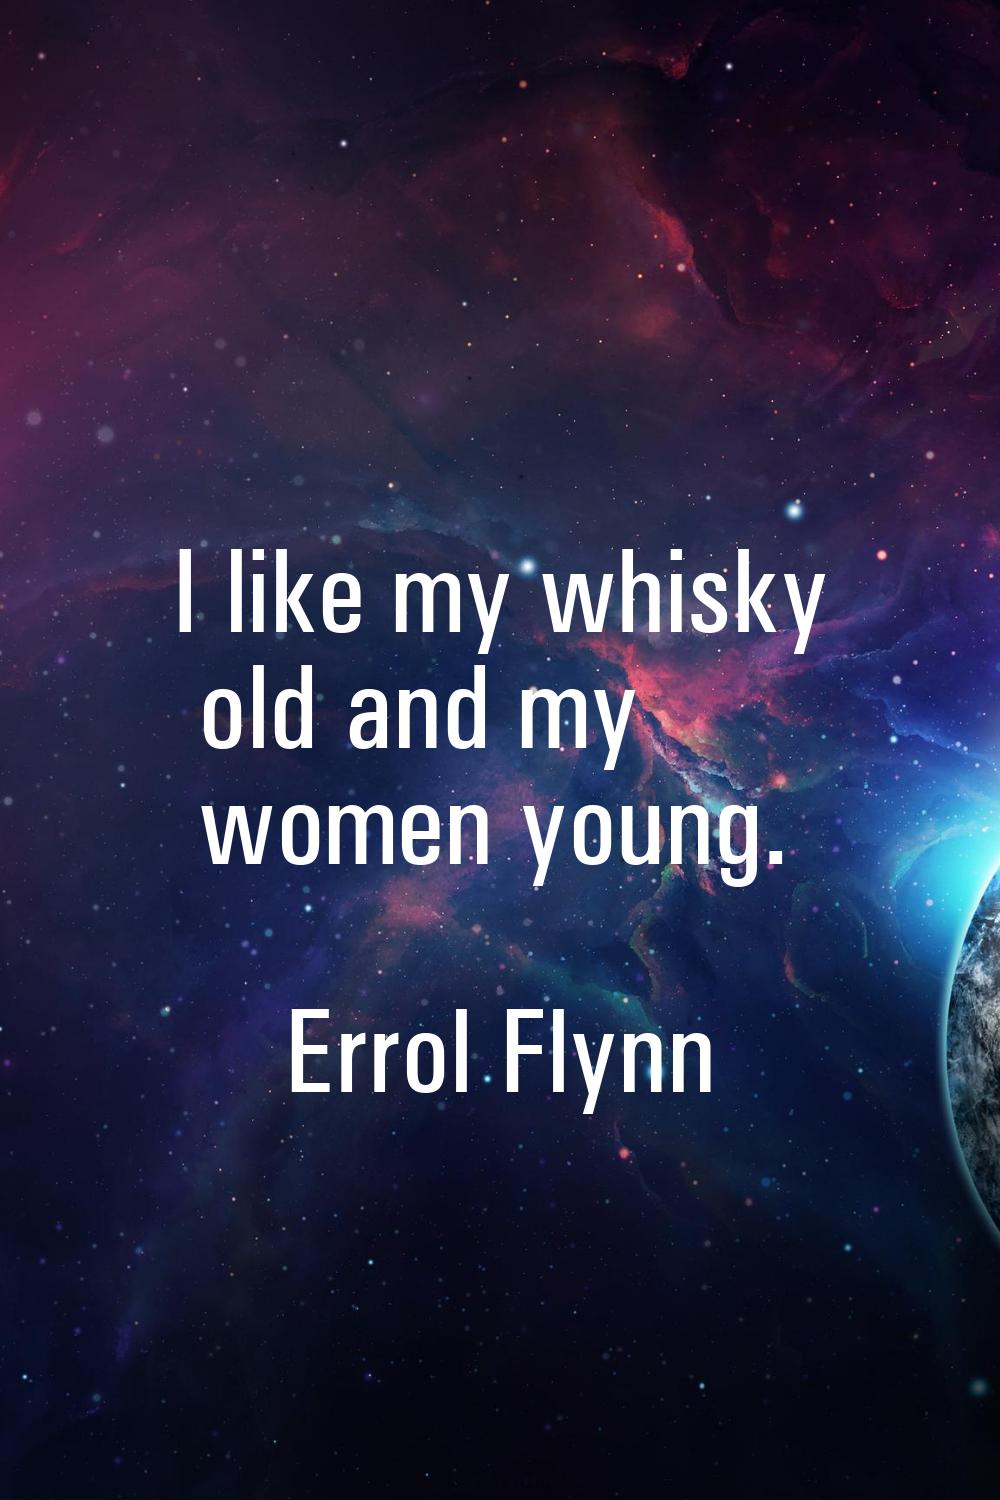 I like my whisky old and my women young.